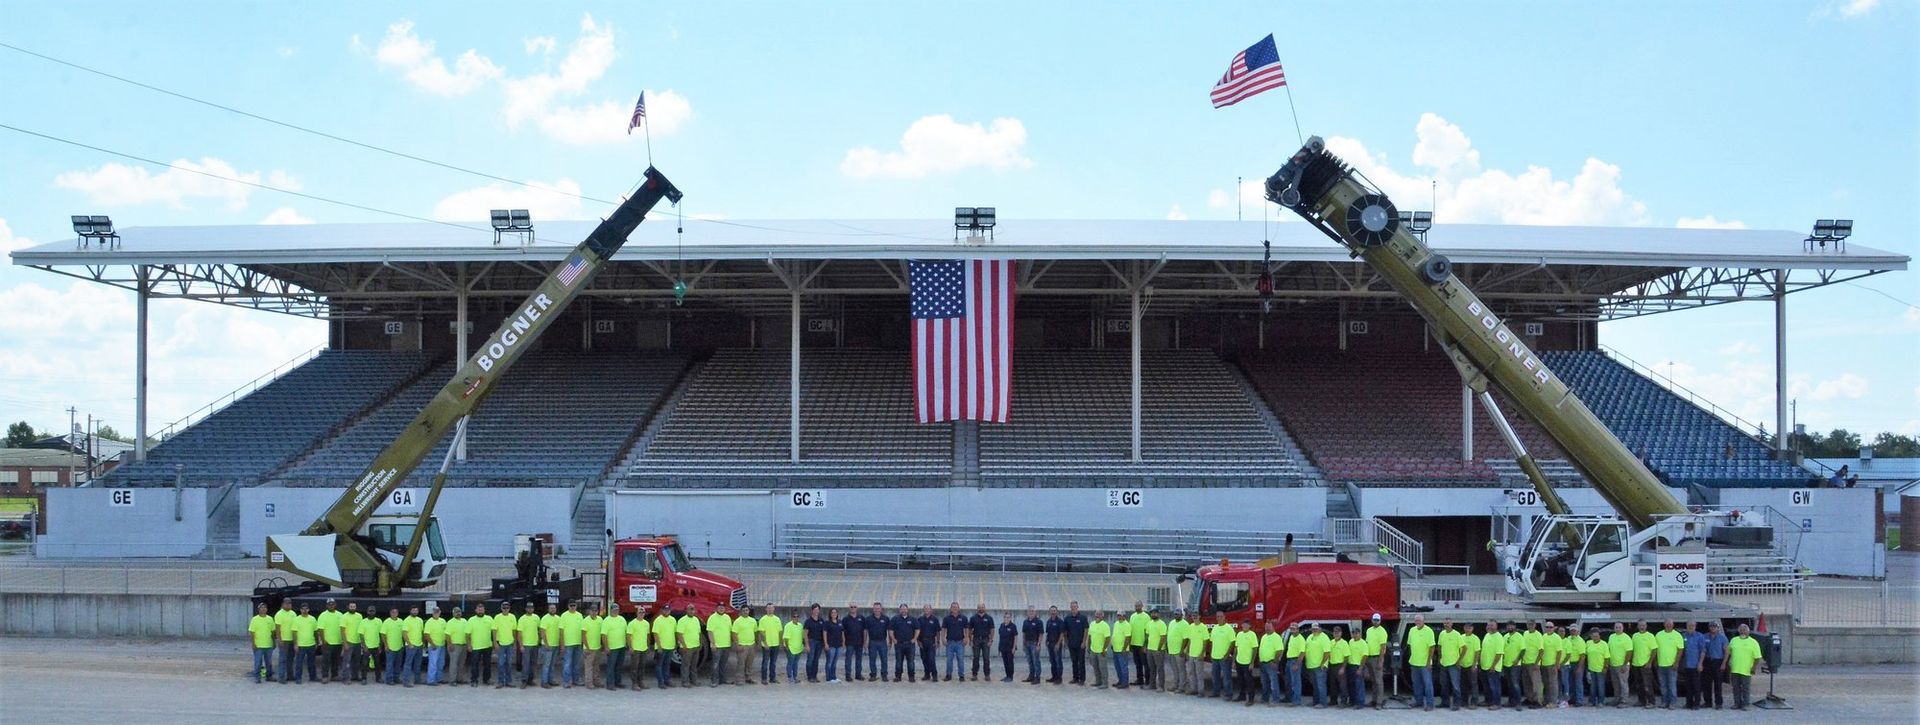 A Group of People Standing in Front of an American Flag | Wooster, OH | Bogner Construction Company